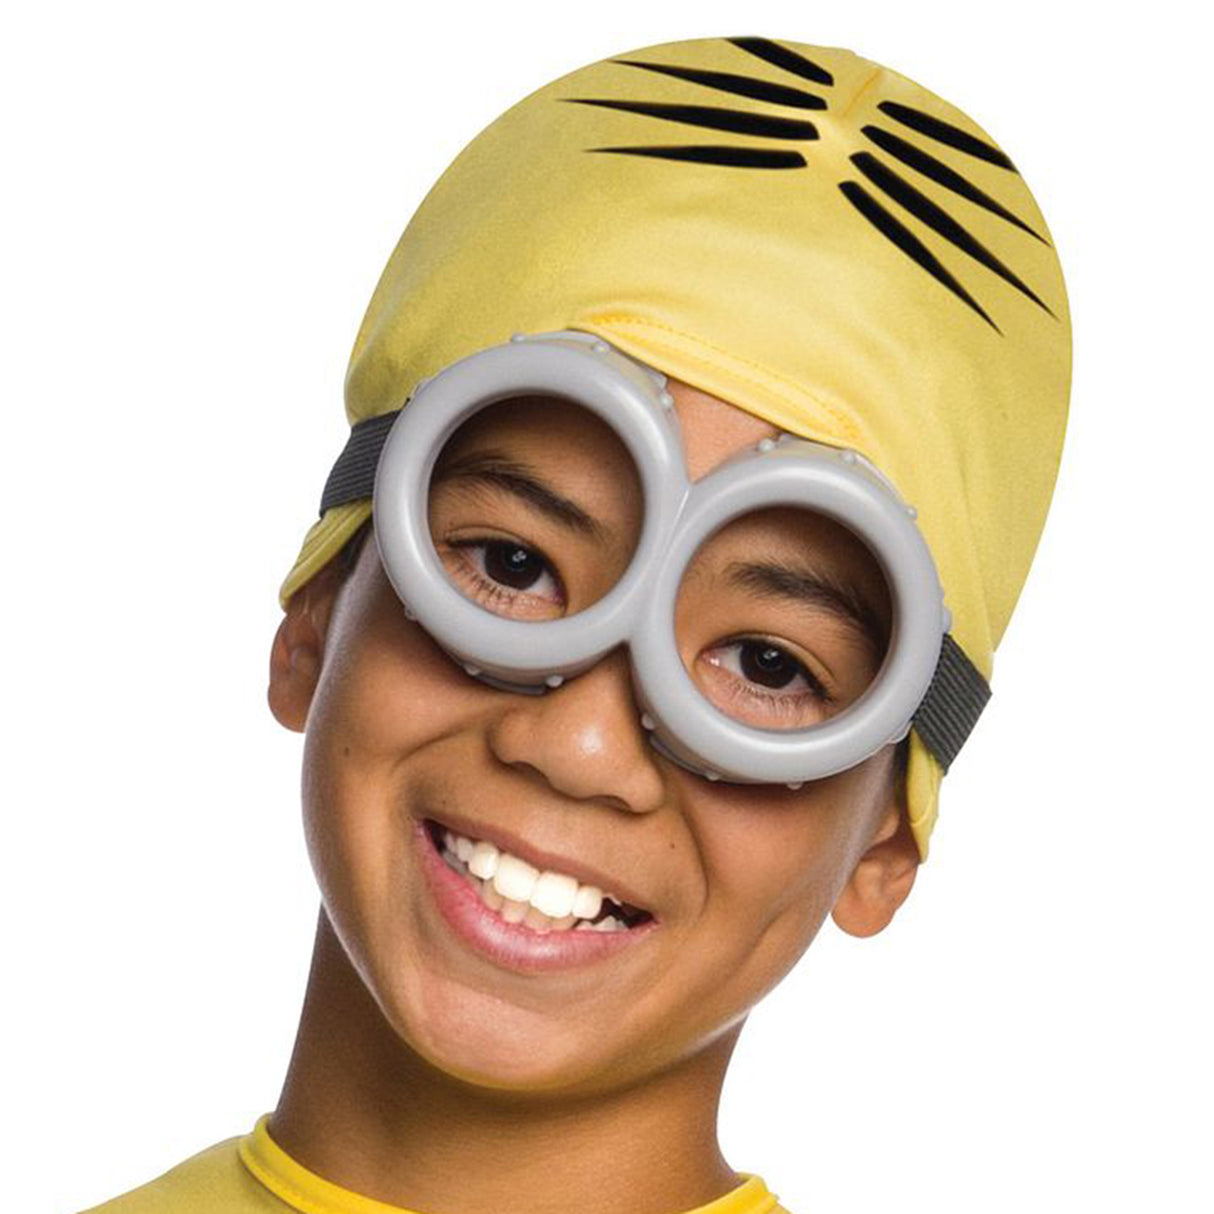 Rubies Despicable Me Minion Dave Costumes (3-5 years)